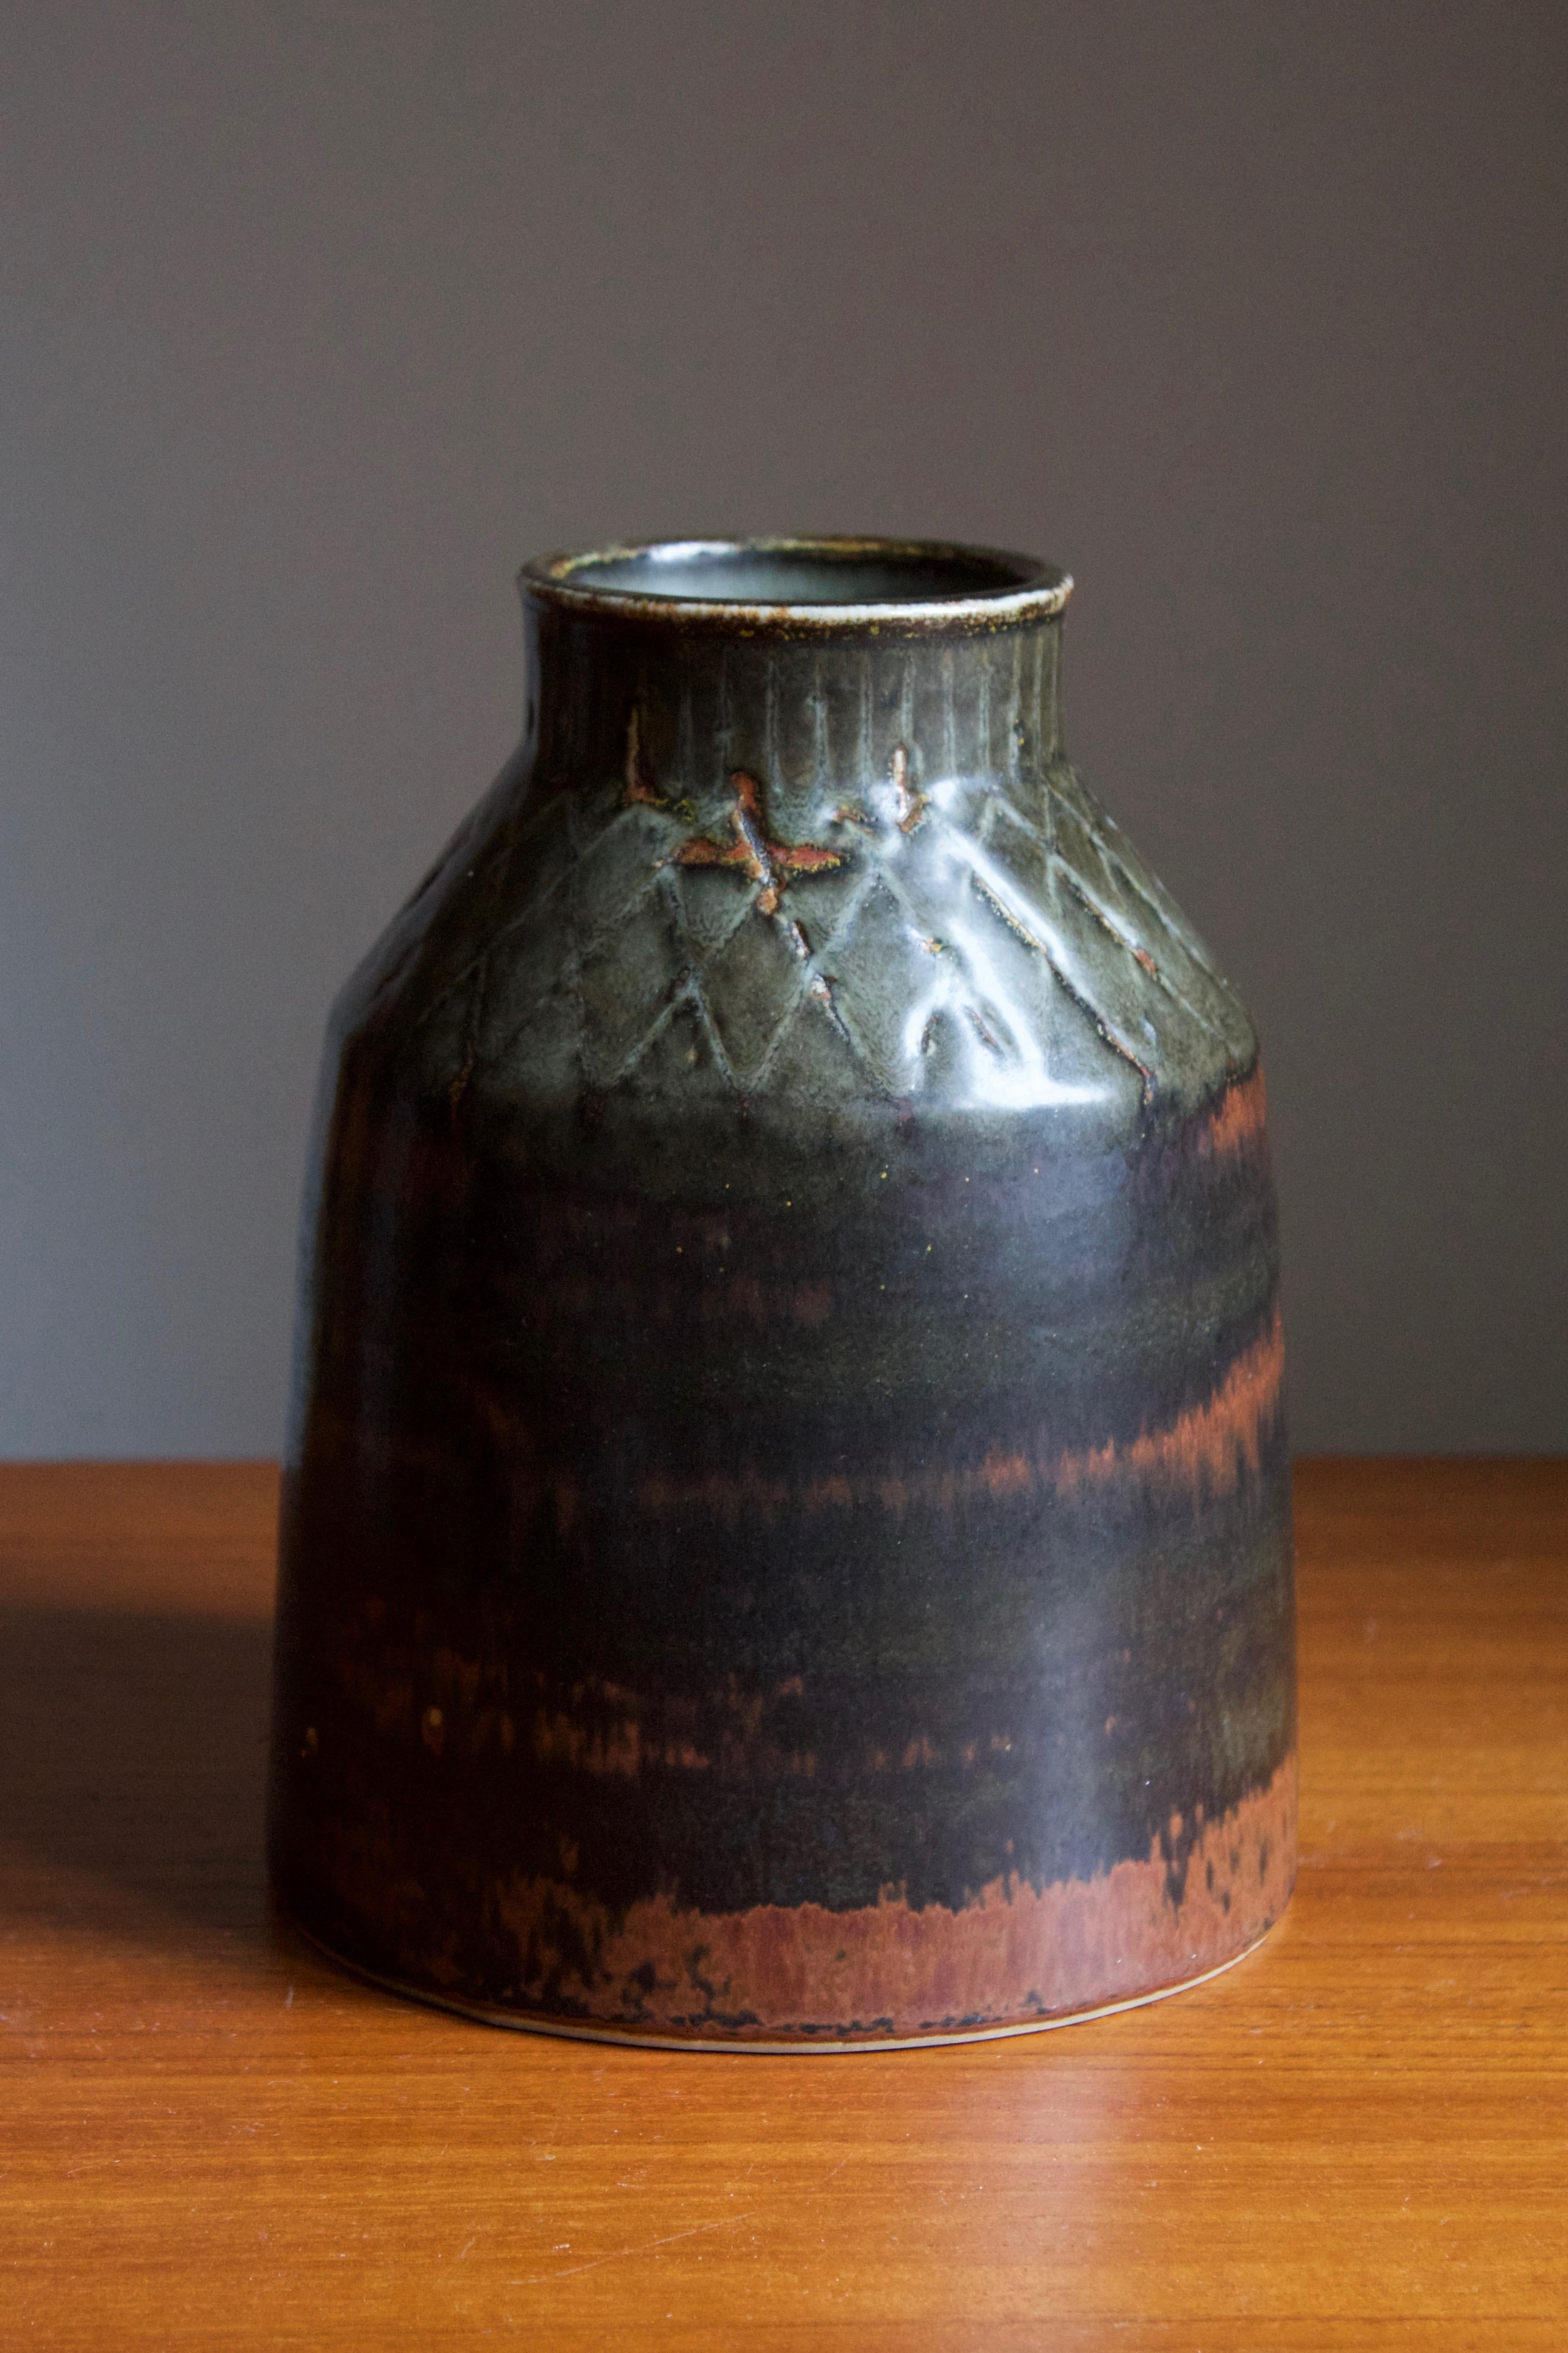 A rare sizable stoneware vase or vessel designed by Carl-Harry Stålhane produced by Rörstrand, signed, likely produced 1960s. From the rare production series at Rörstands named 